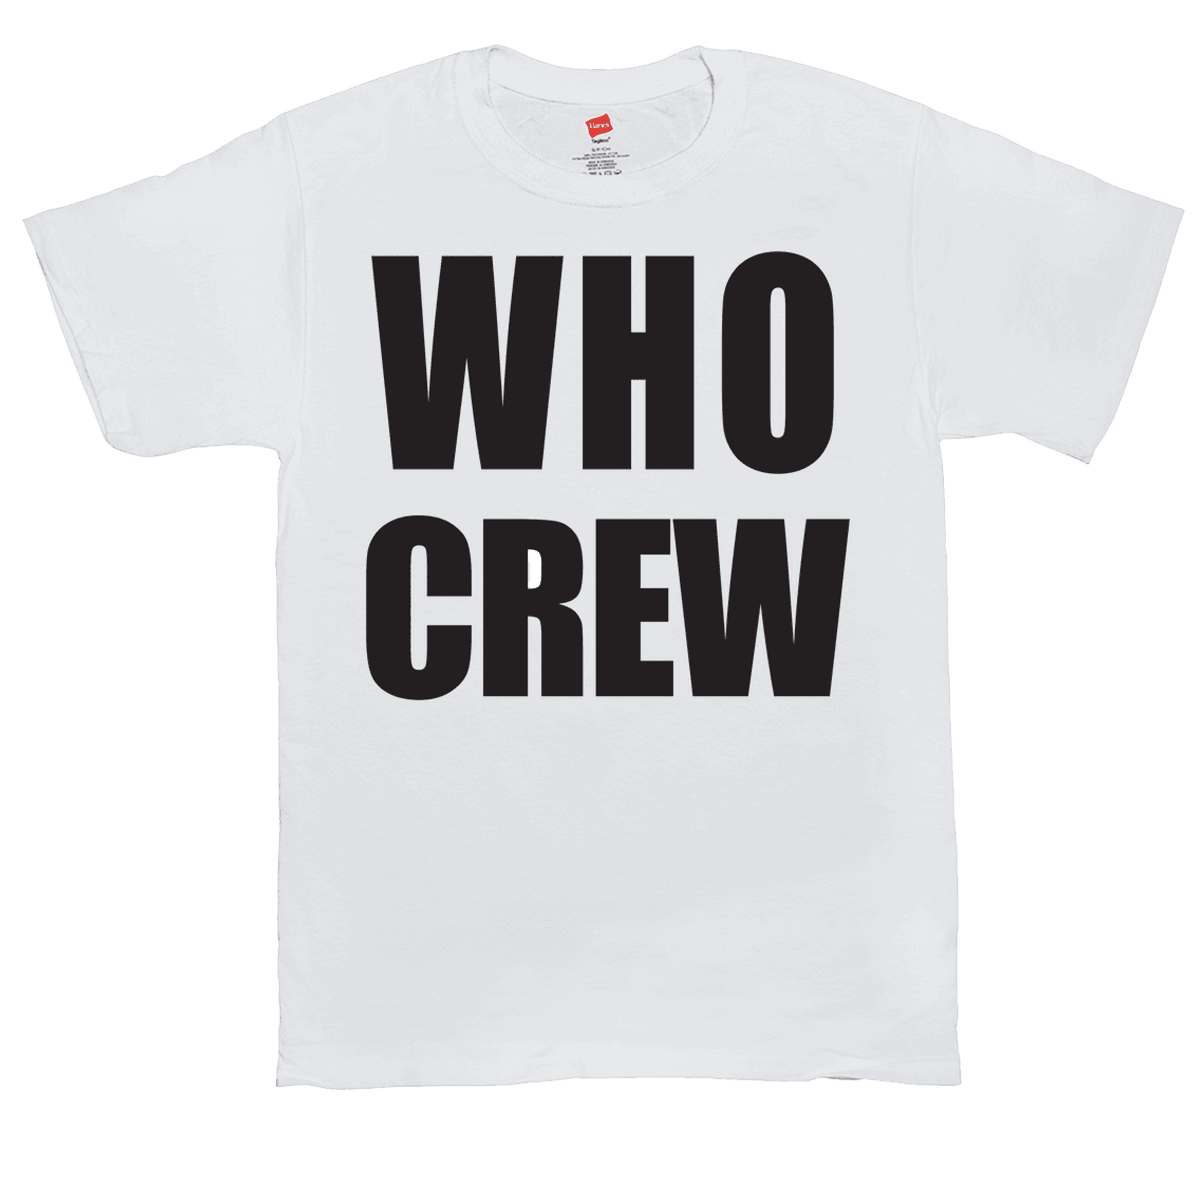 Who Crew T-Shirt:  The Betty Who family iconic Who Crew t-shirt.